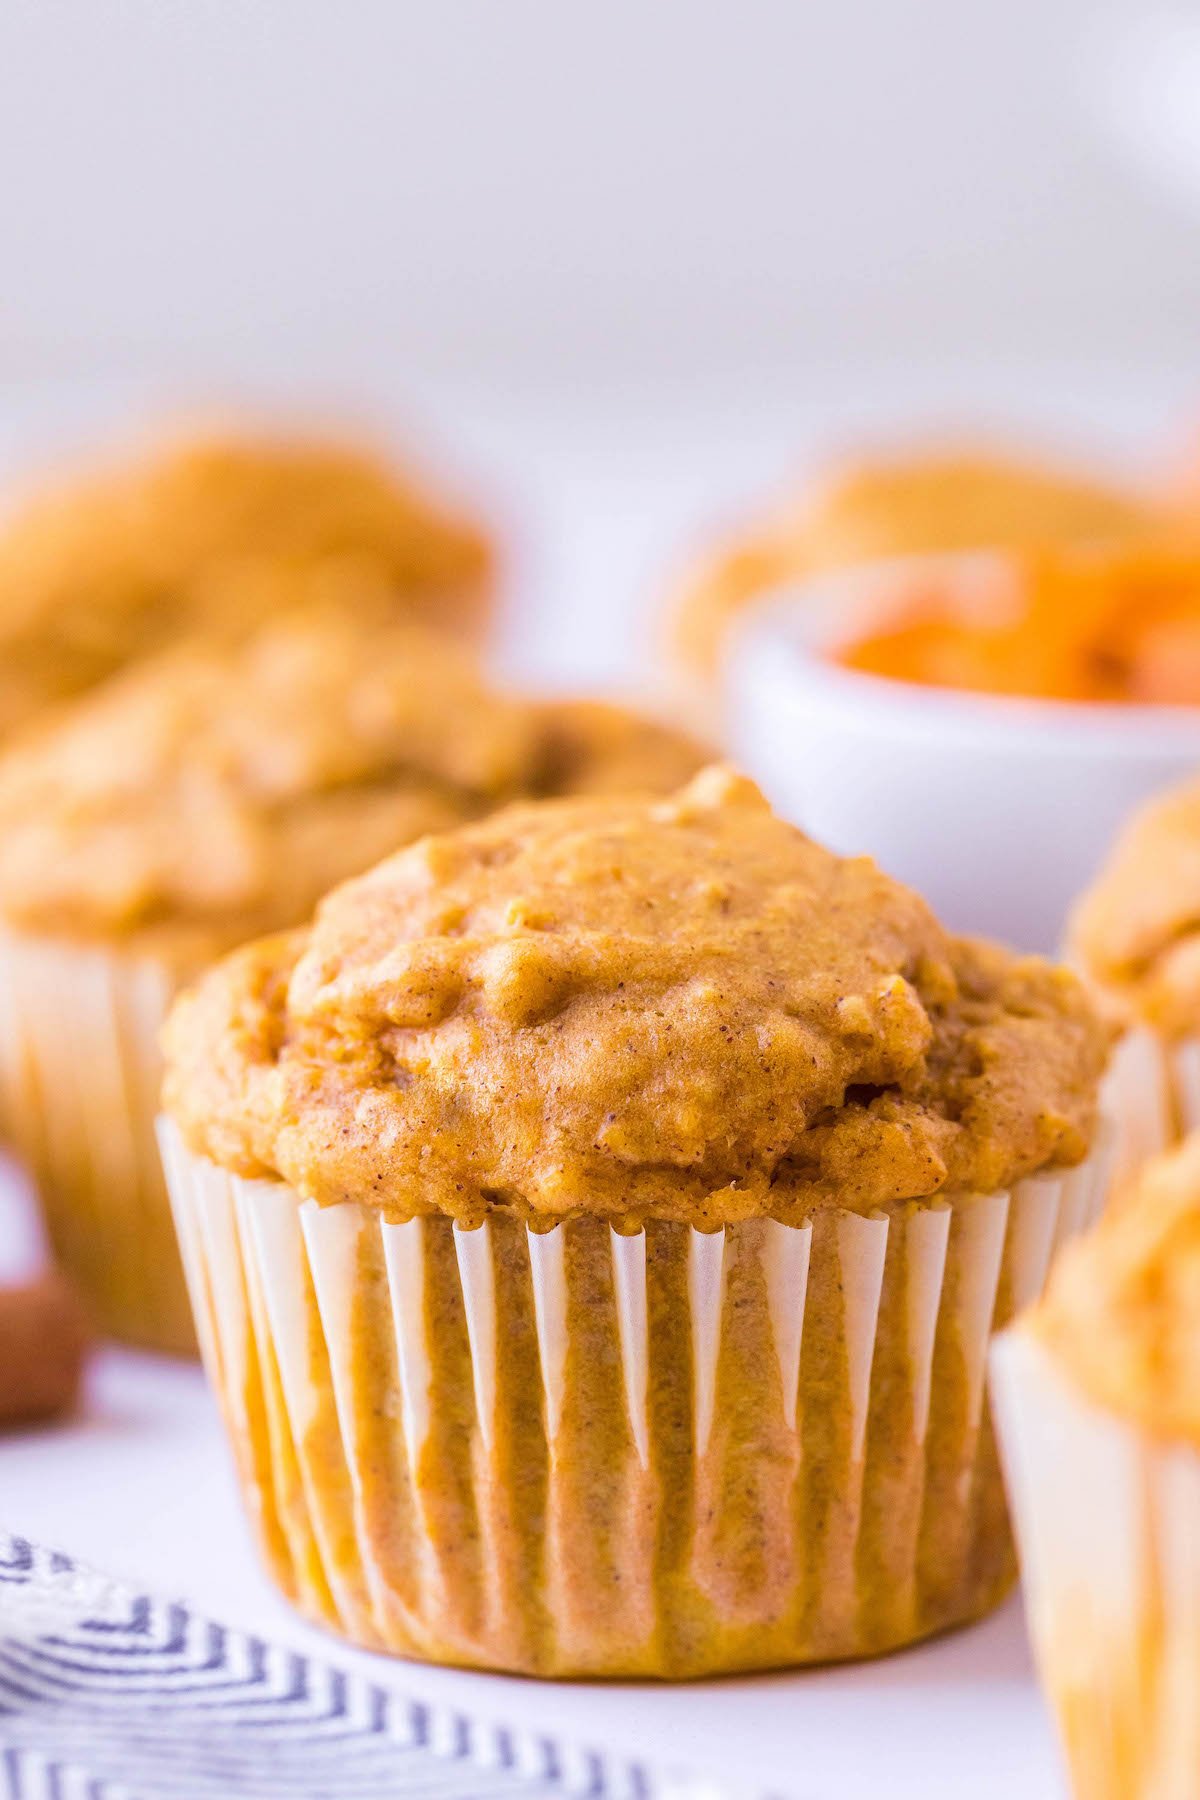 Up close image of a pumpkin oat muffin surrounded by other muffins on a tea towel.